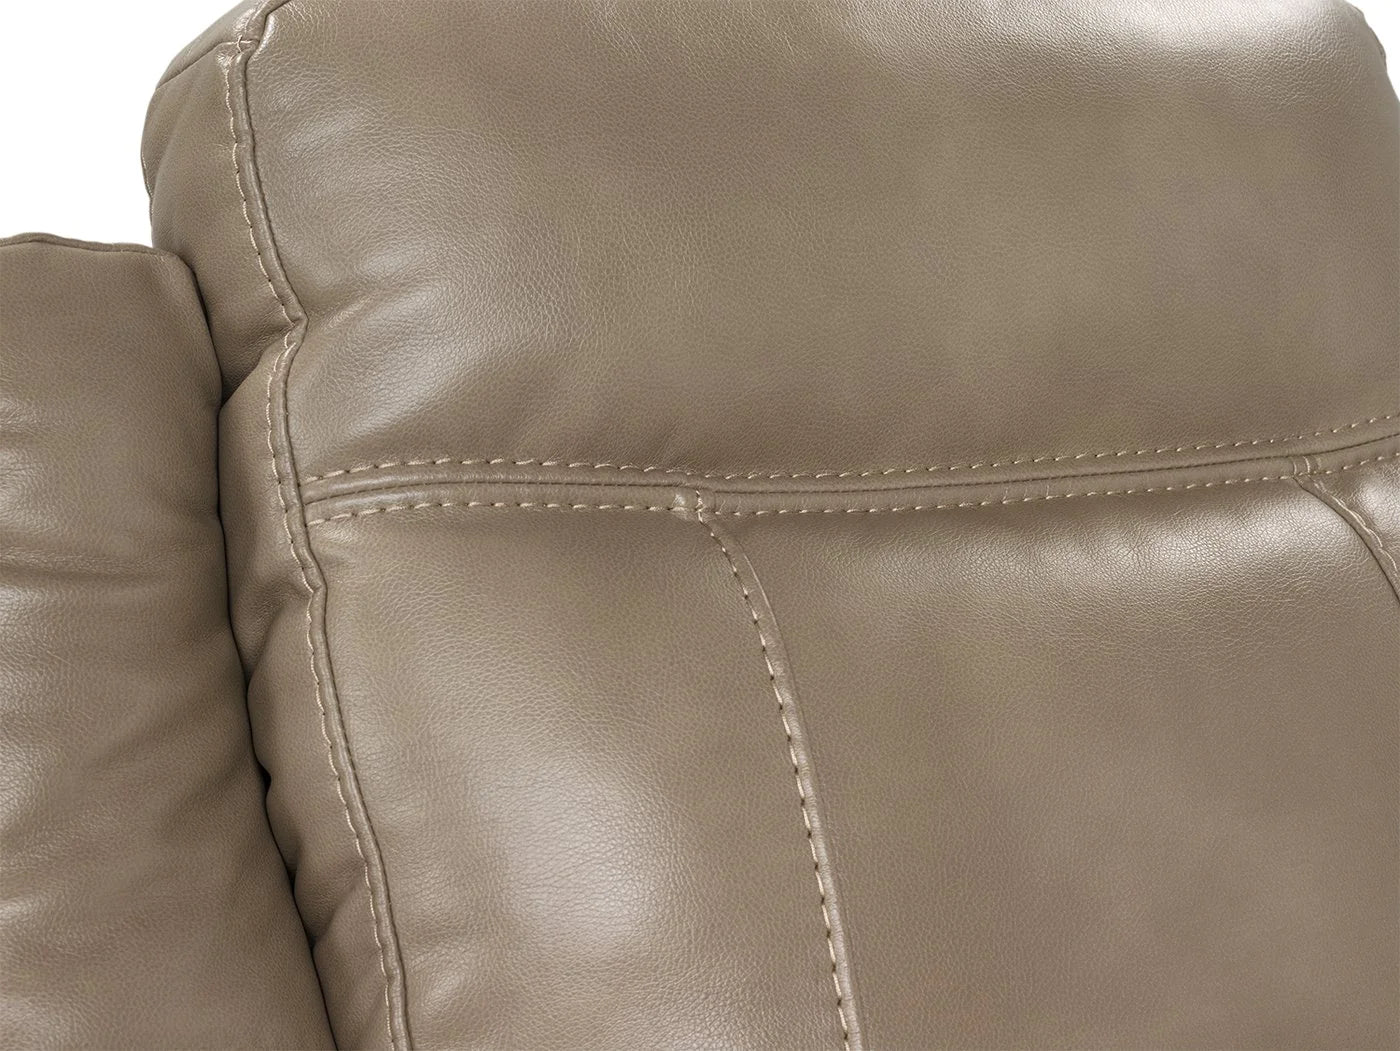 Leather-Look Fabric Power Reclining Sofa - Taupe